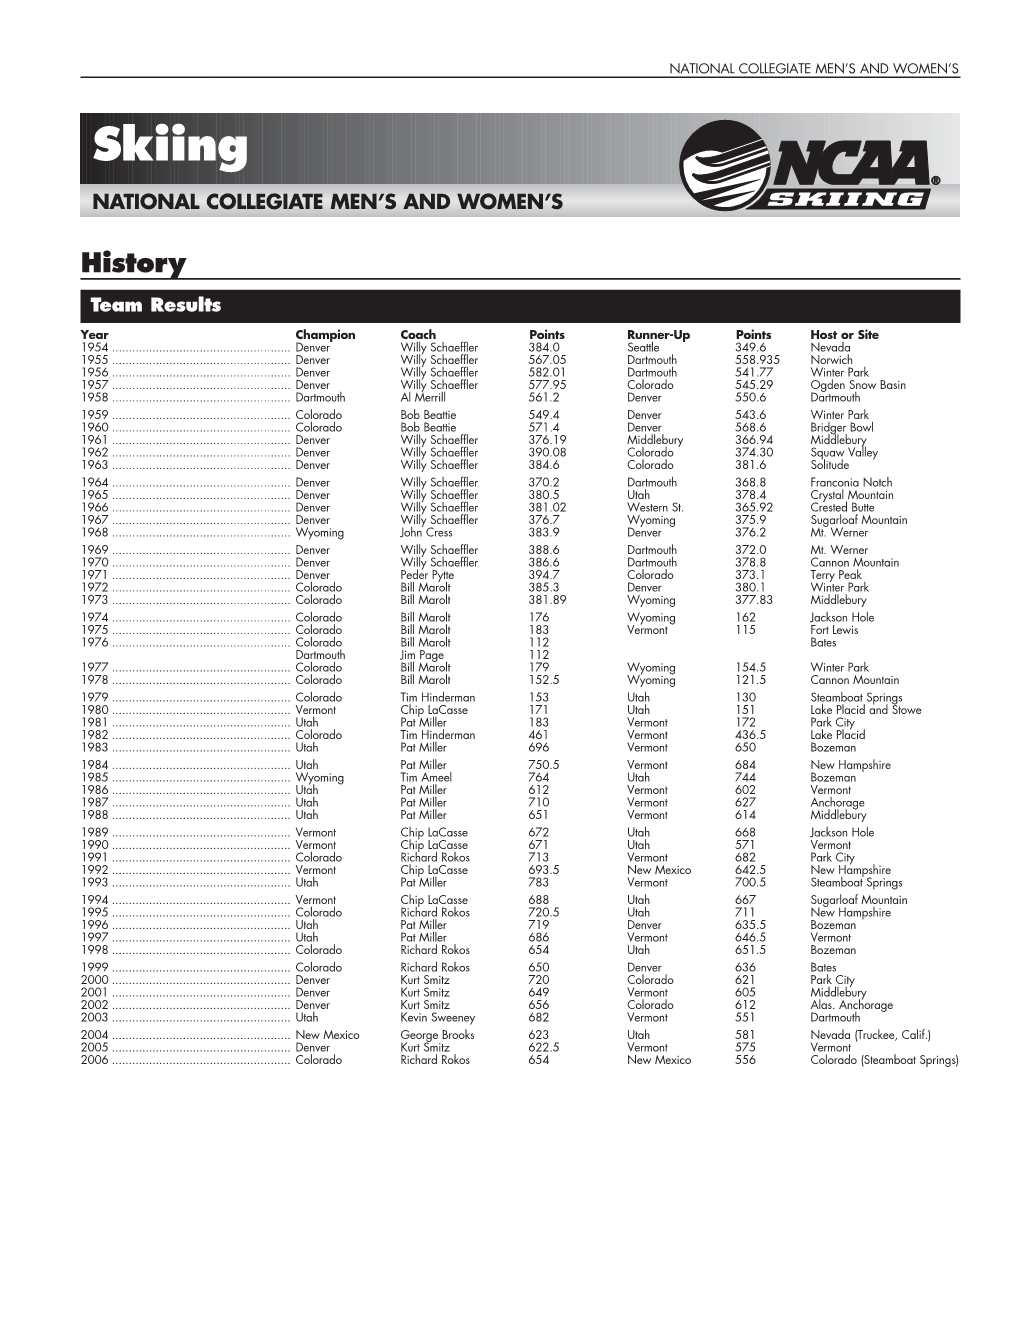 2006 NCAA National Collegiate Men's and Women's Skiing Championships Tournament Records